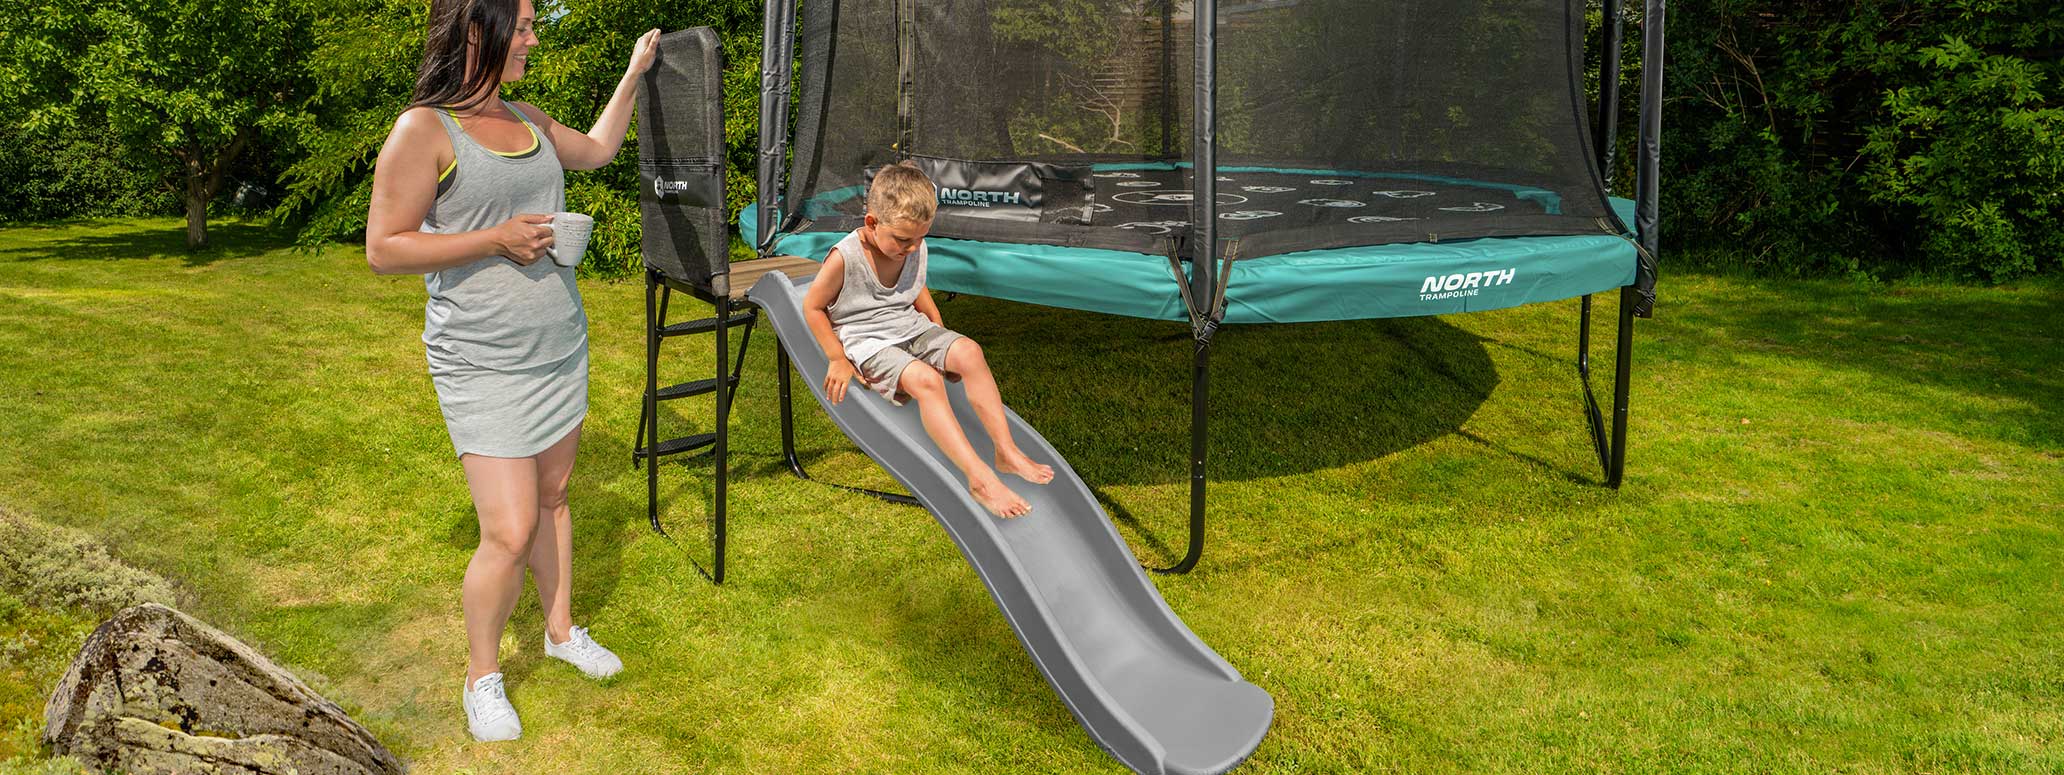 North Base Platform | Climb on and off your Trampoline – North USA